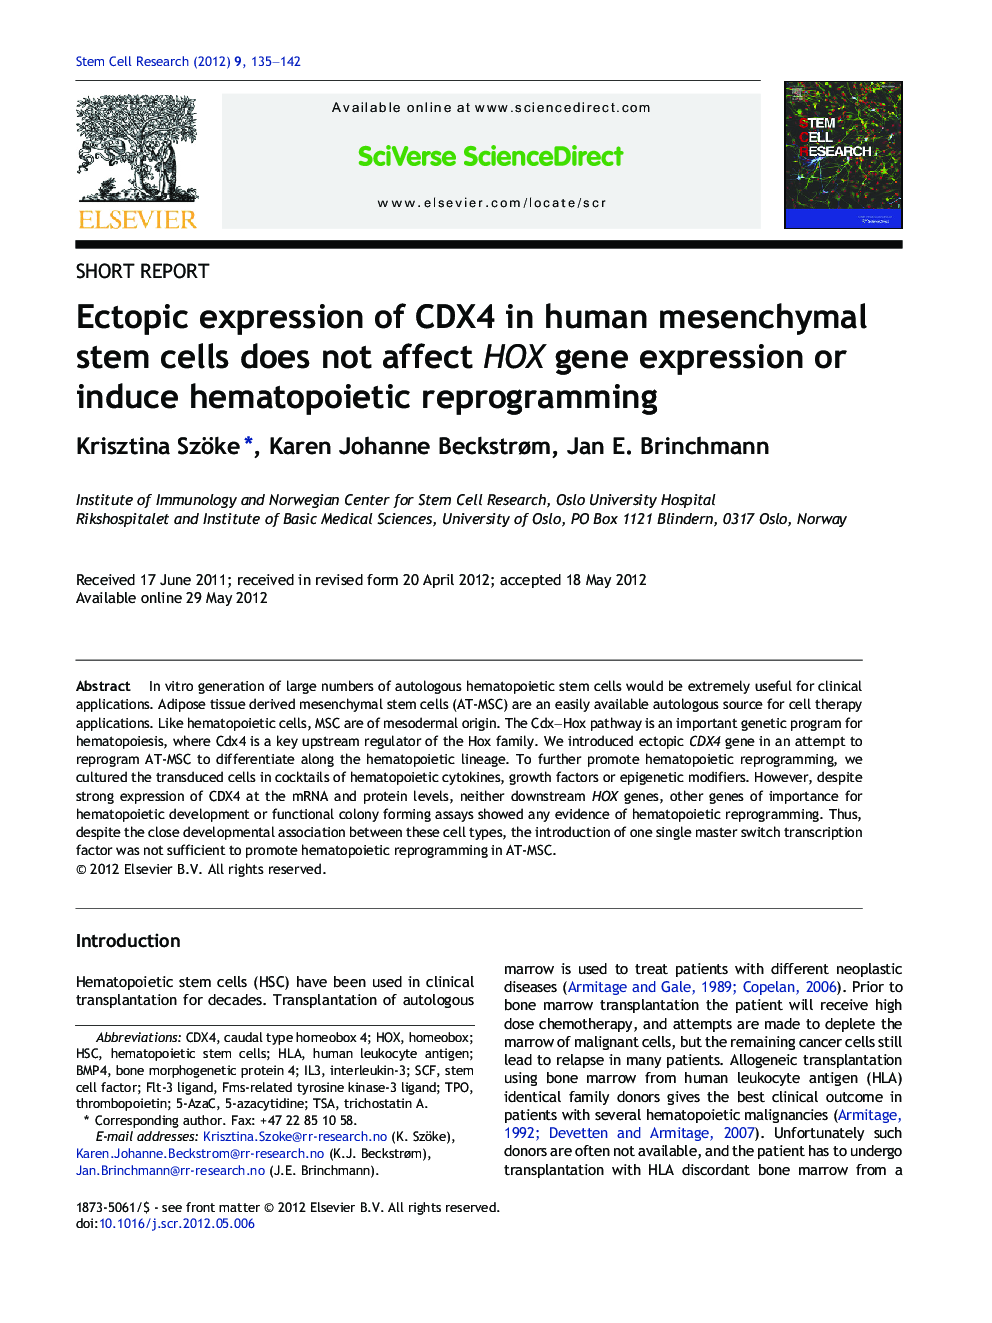 Ectopic expression of CDX4 in human mesenchymal stem cells does not affect HOX gene expression or induce hematopoietic reprogramming